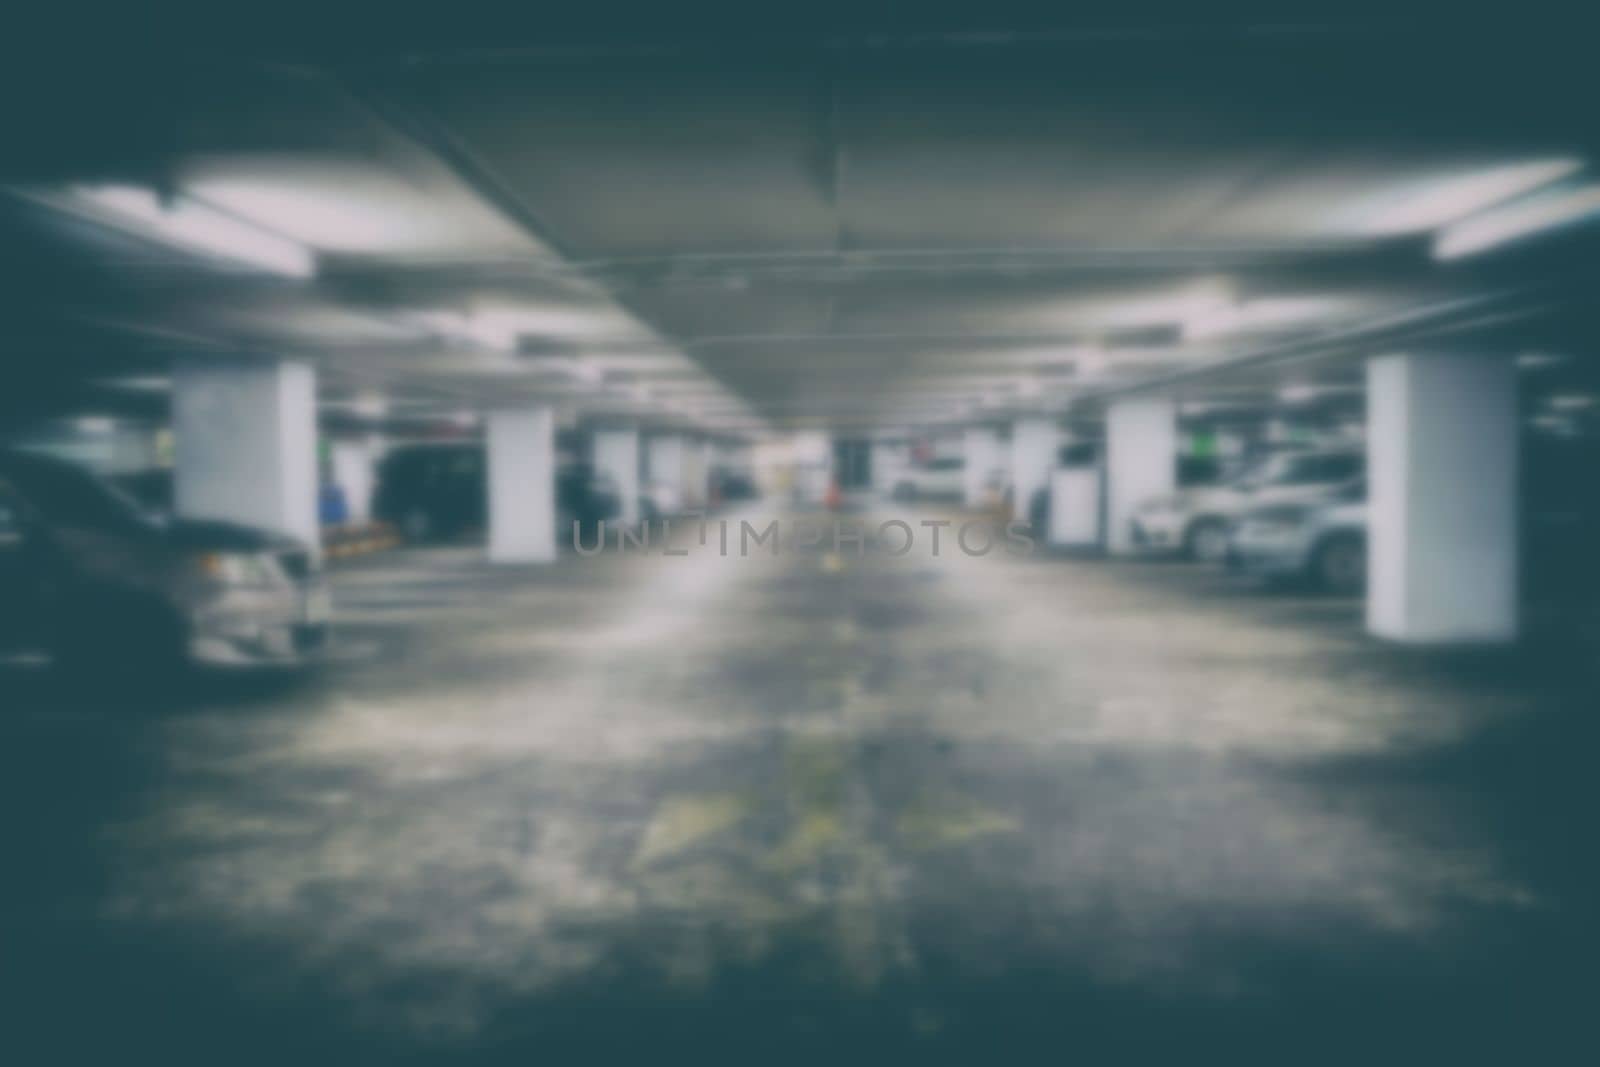 Blurred Image of Underground Car Parking. by mesamong